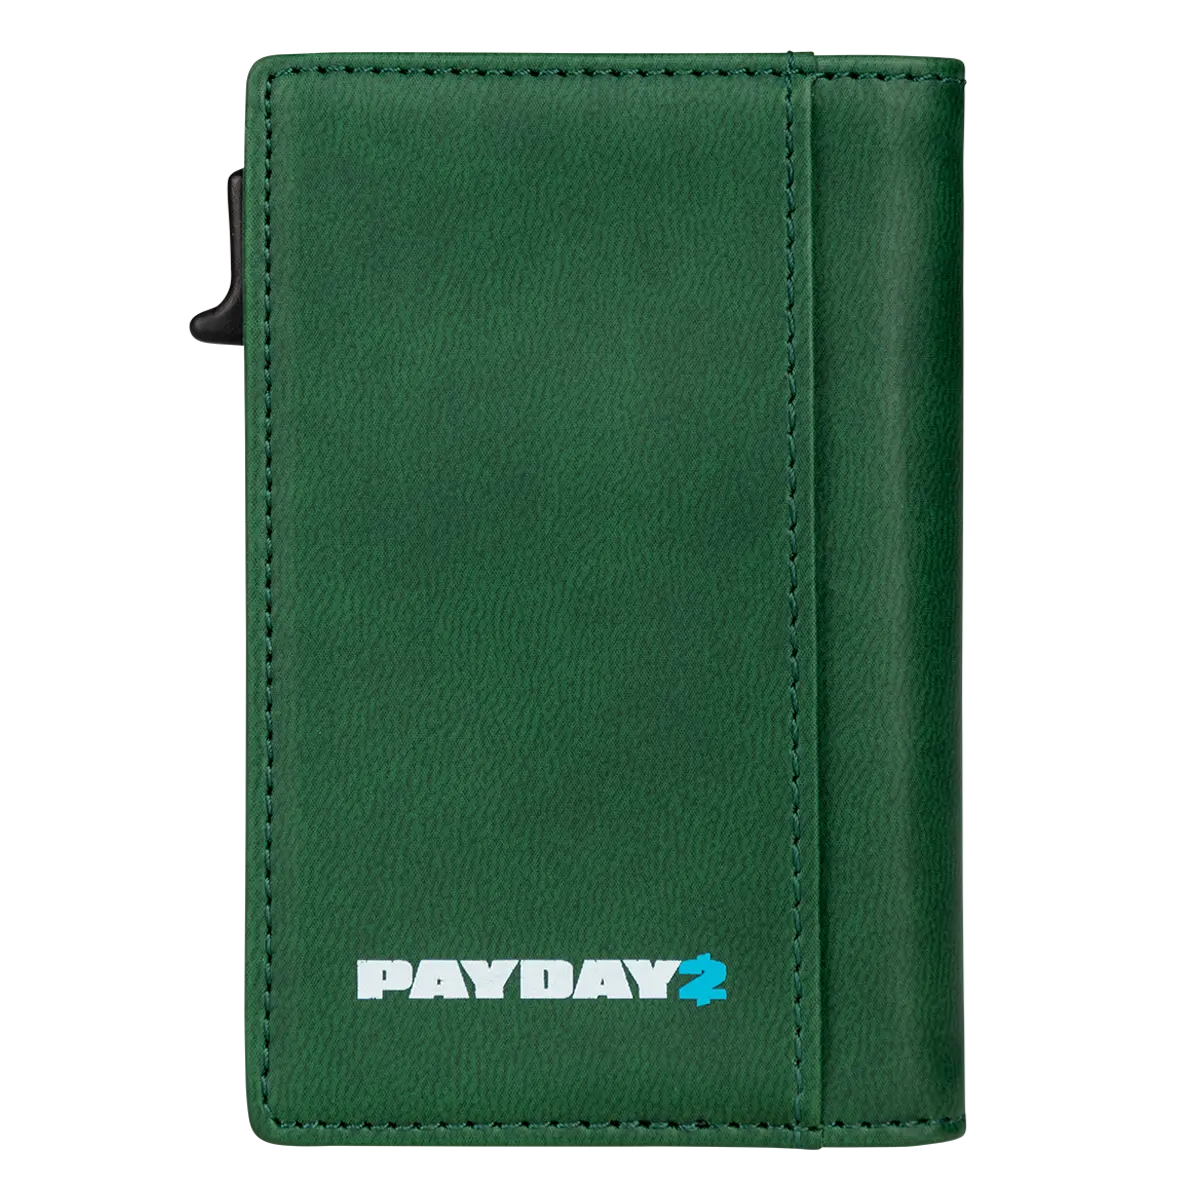 Payday Credit Card Holder "Harvest & Trustee" Image 2